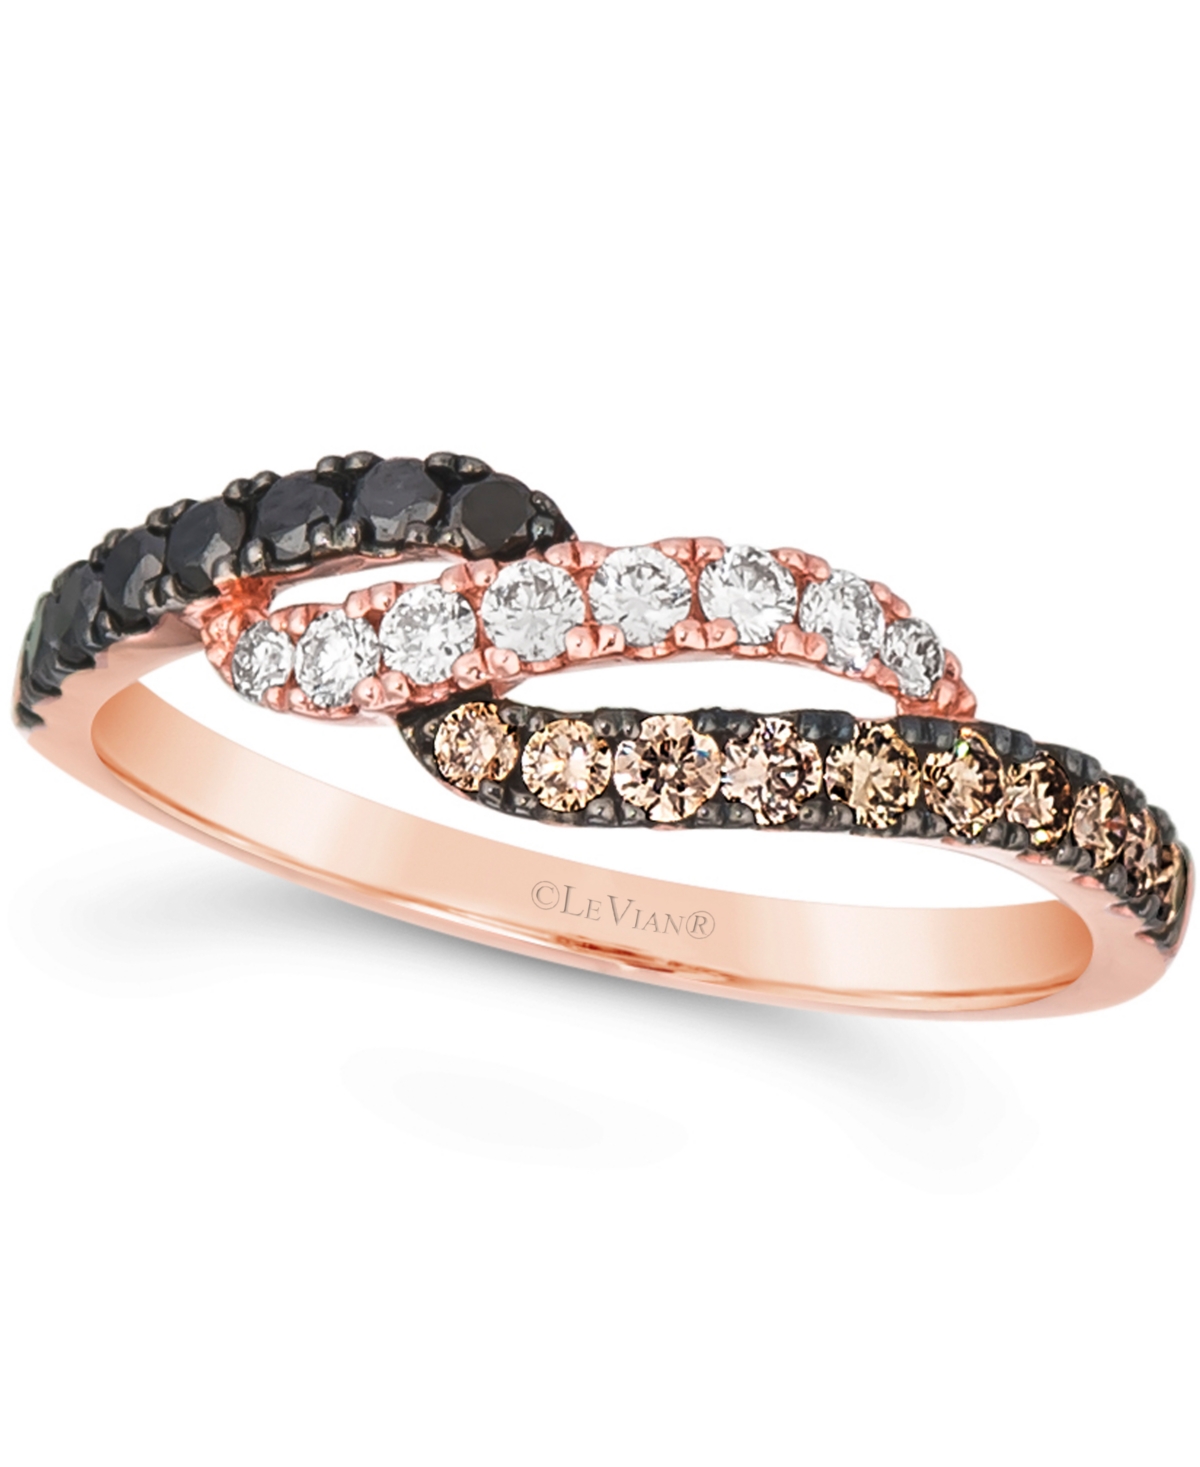 Multicolor Diamond Statement Ring (1/2 ct. t.w.) in 14k Rose Gold - Rose Gold